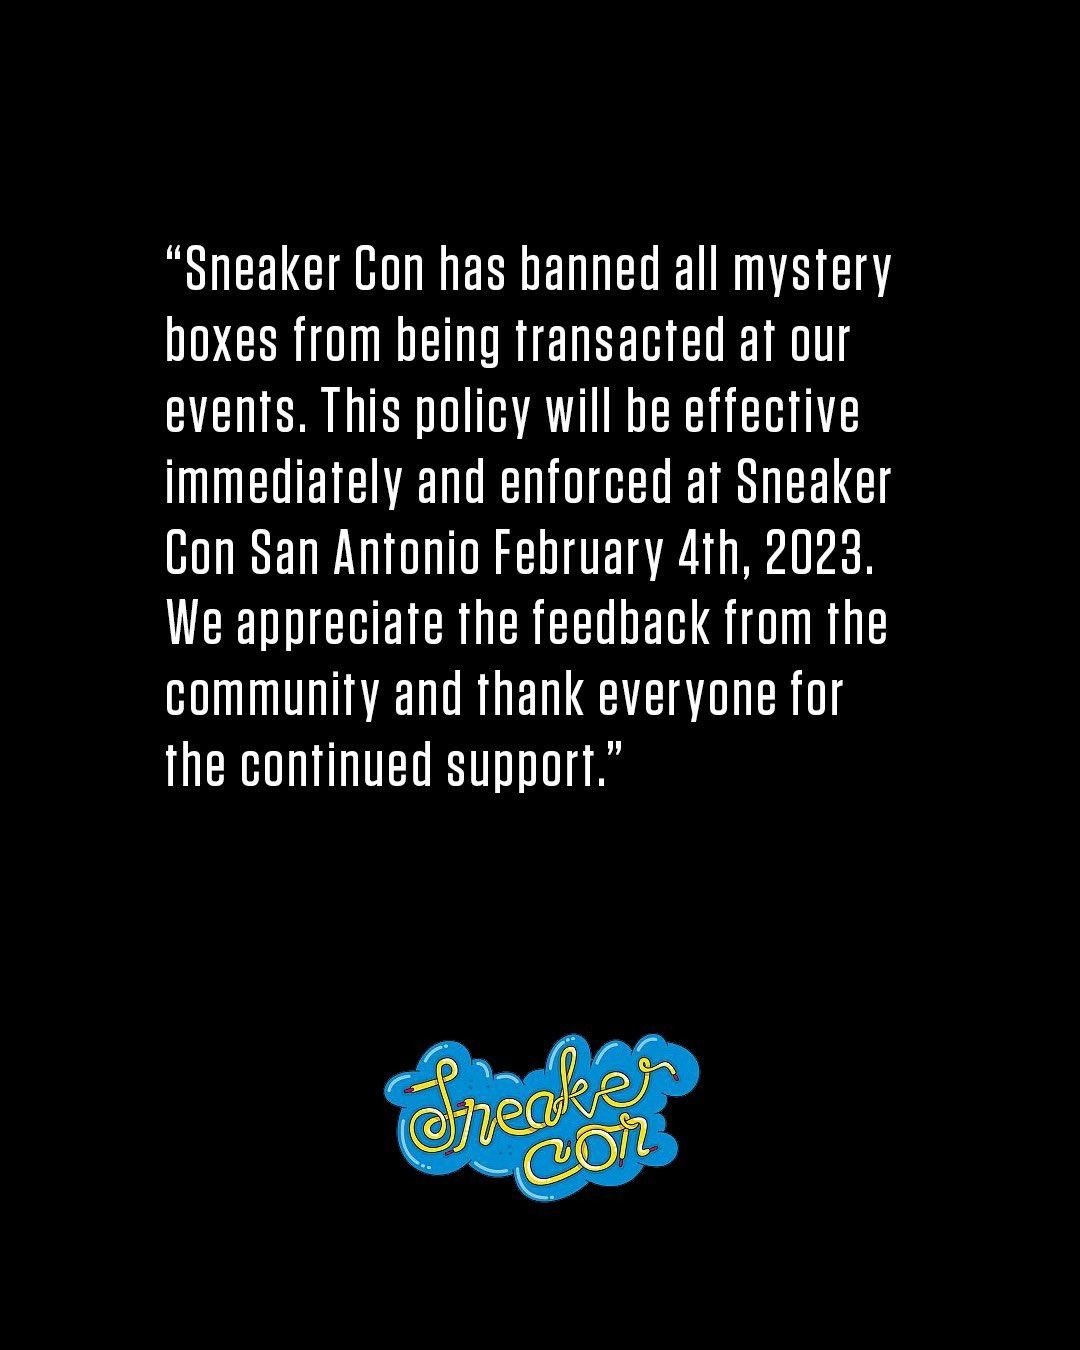 Sneakercon banning mysteryboxes site supply